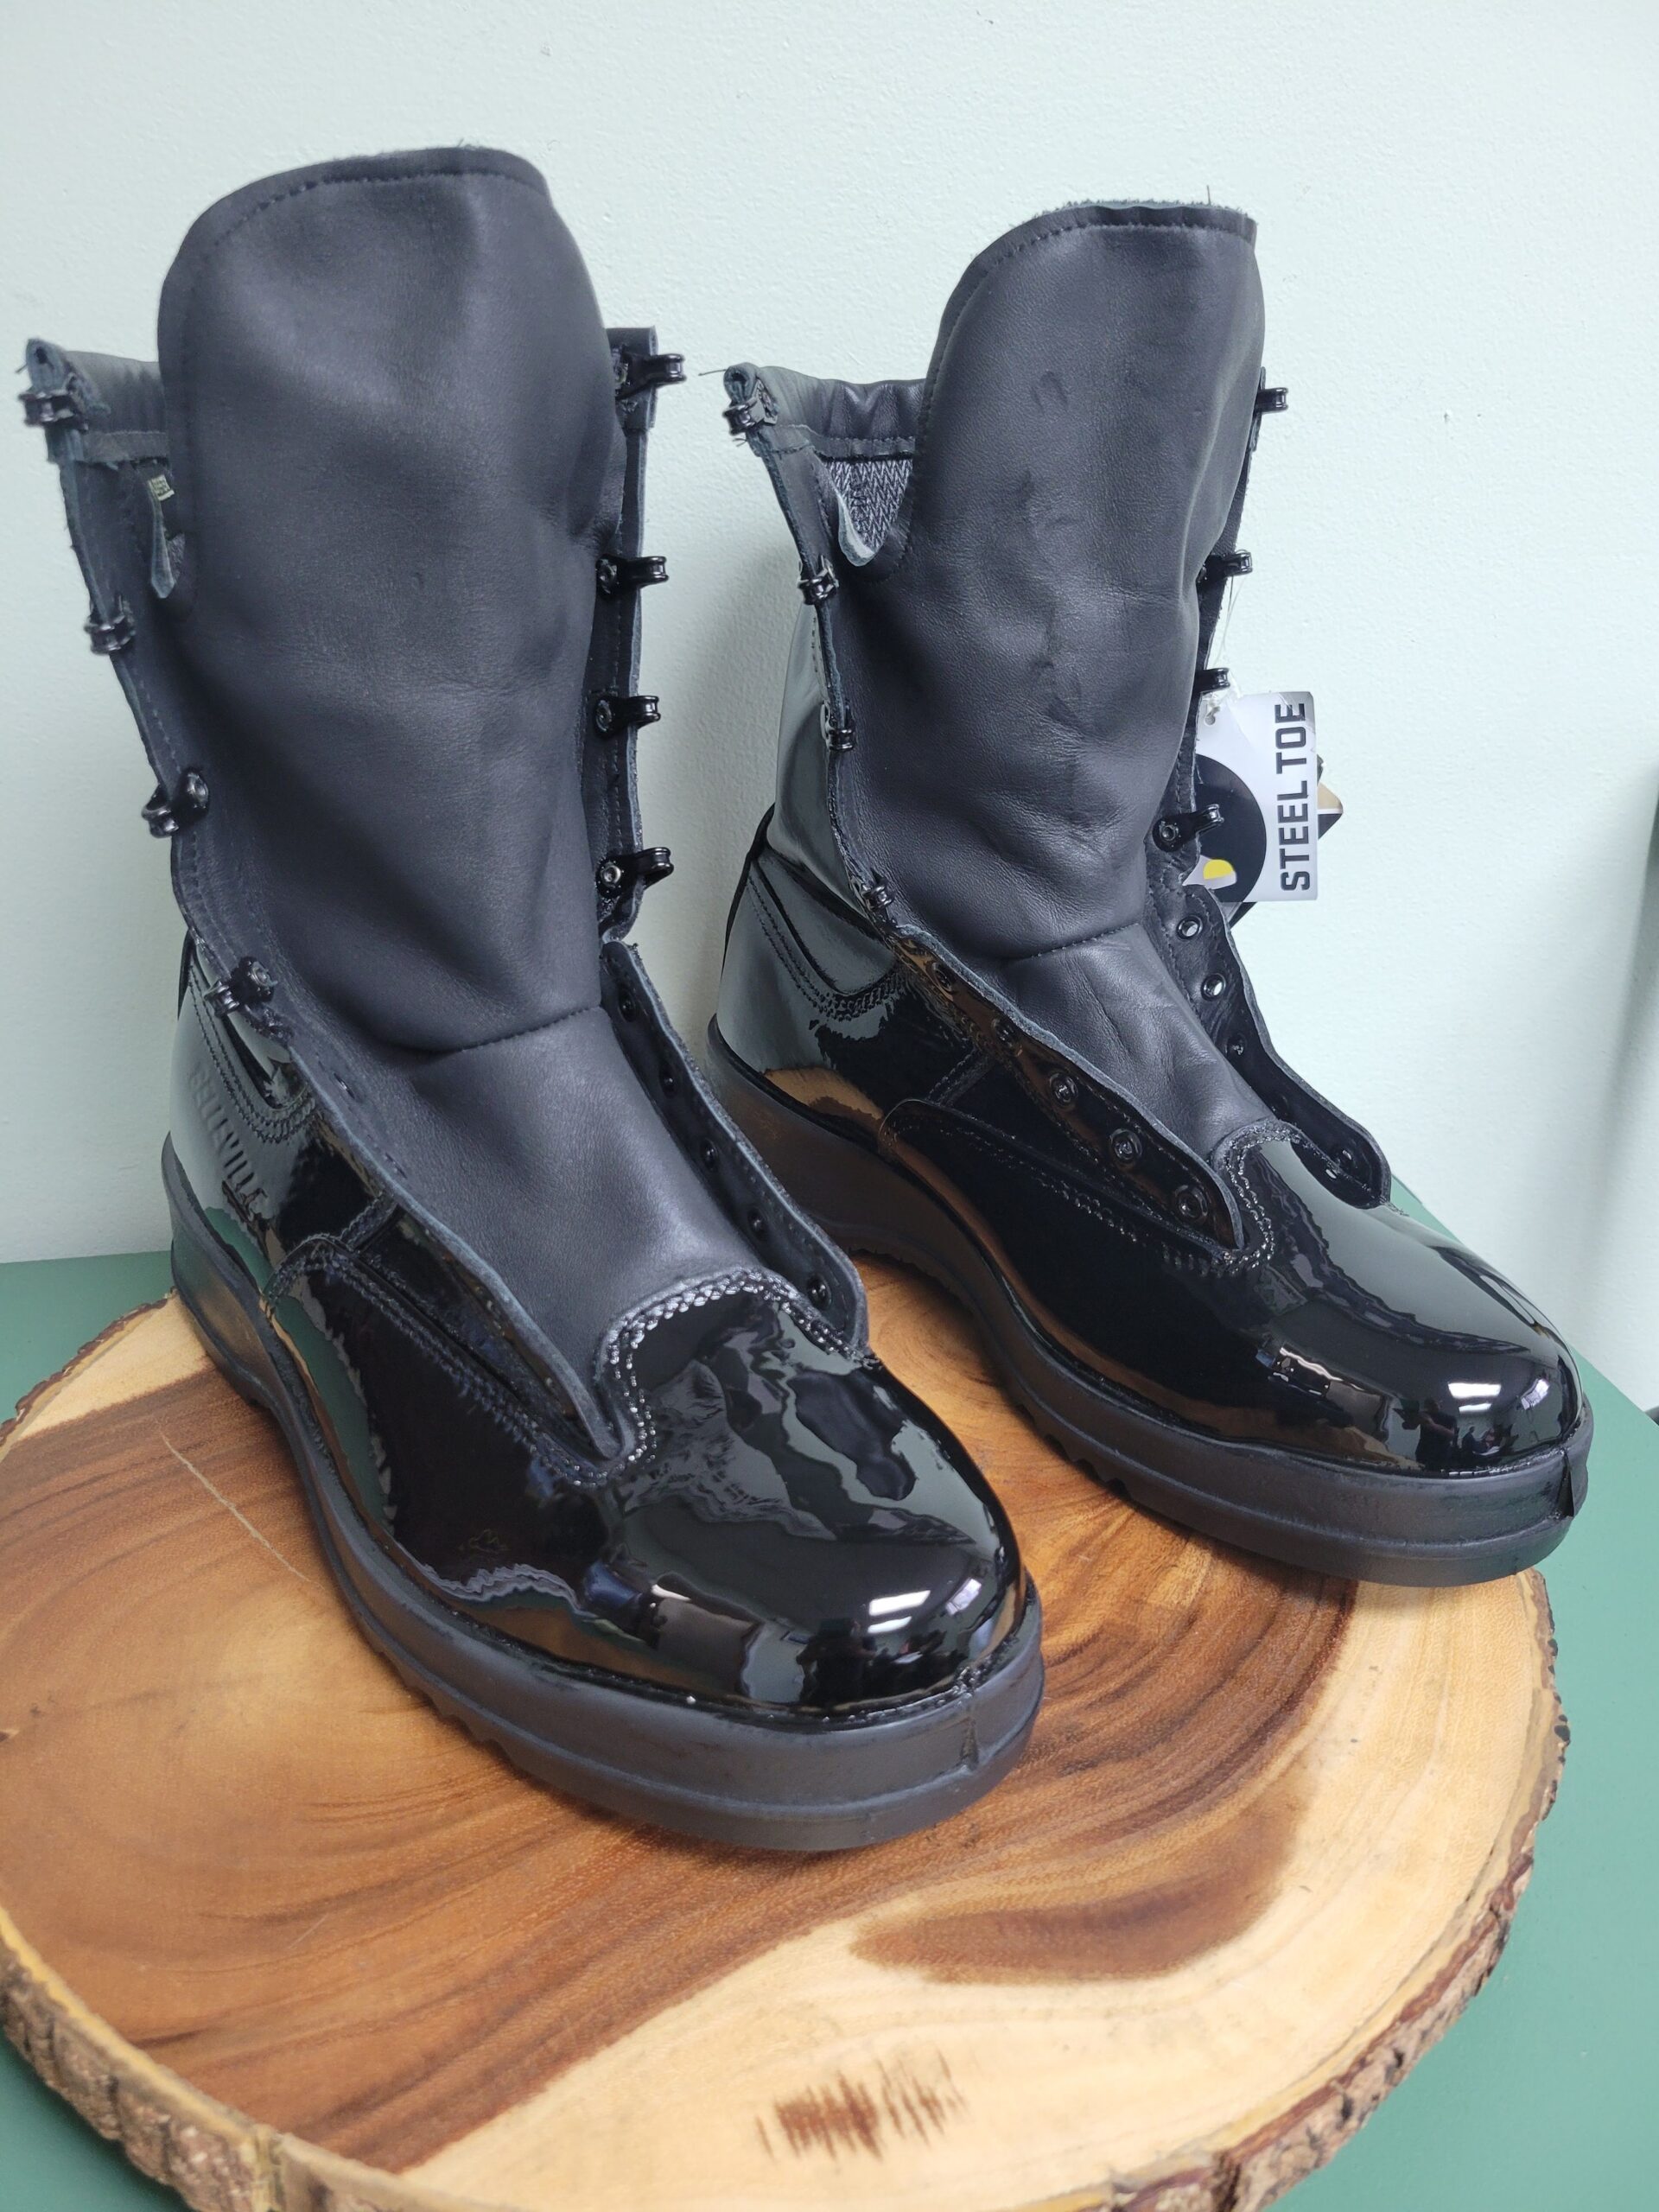 How to shine duty boots with leather luster